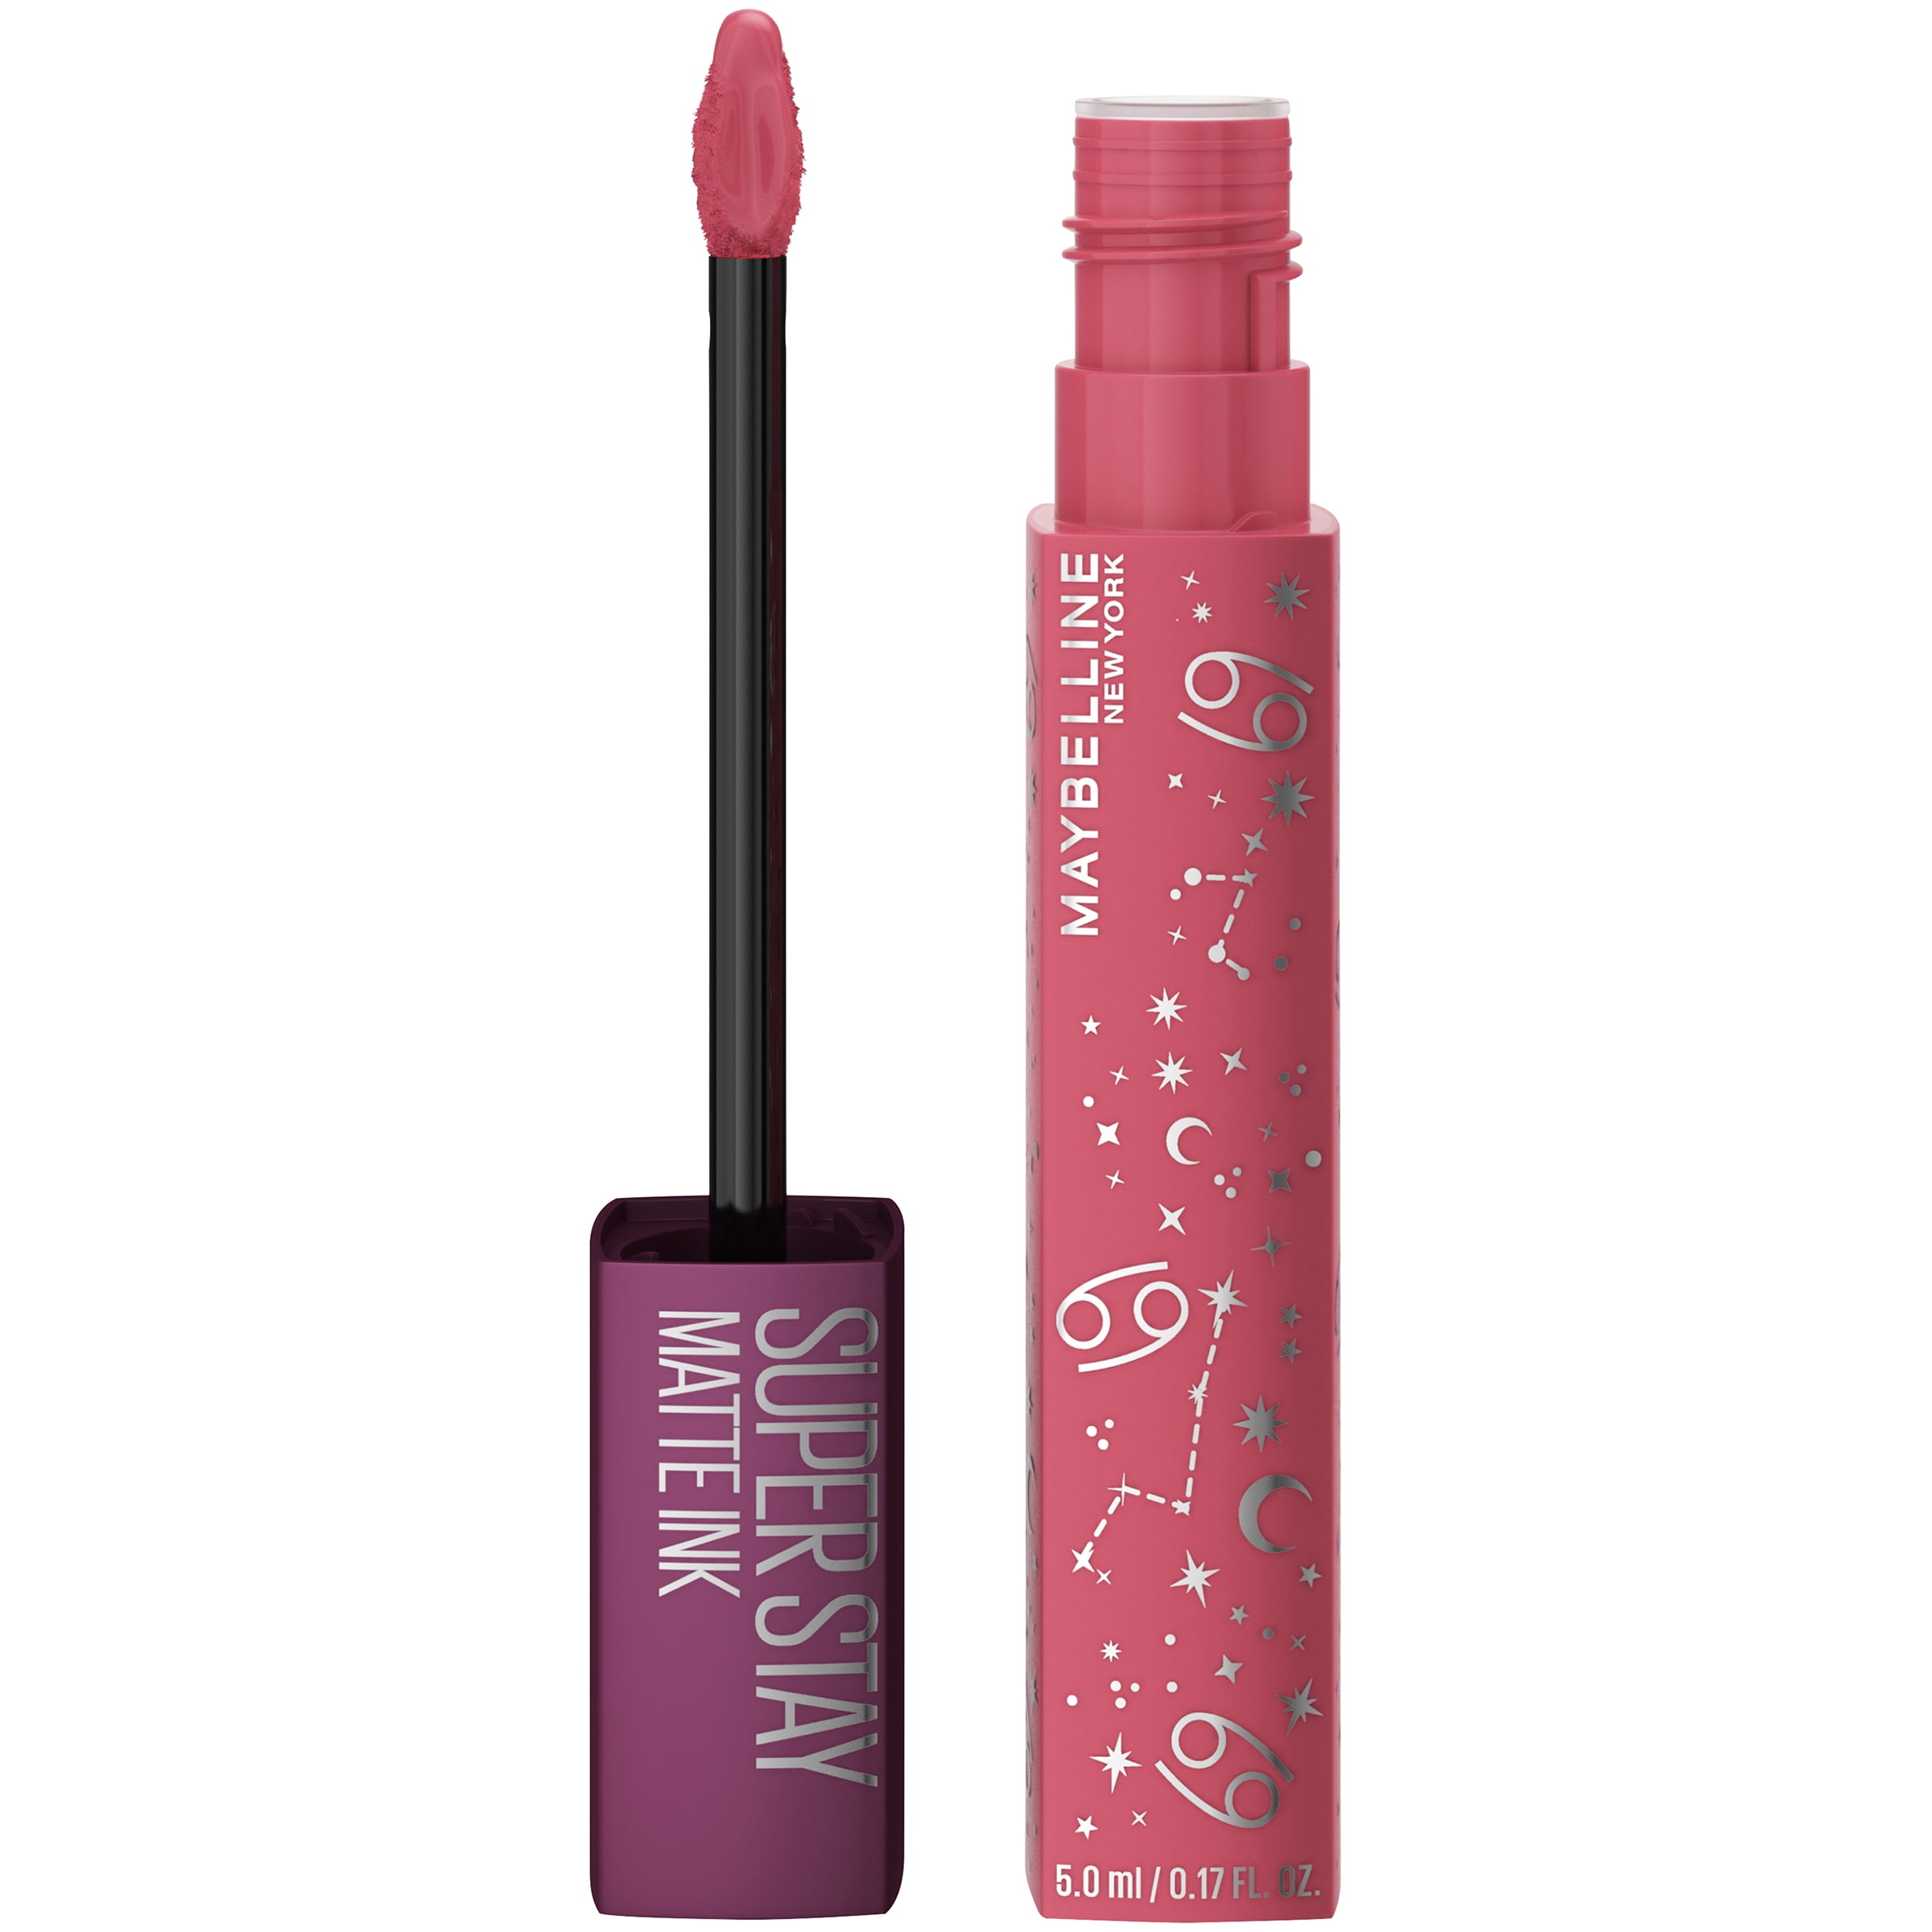 I Tried Maybelline's SuperStay Liquid Lipstick and Now I Want It